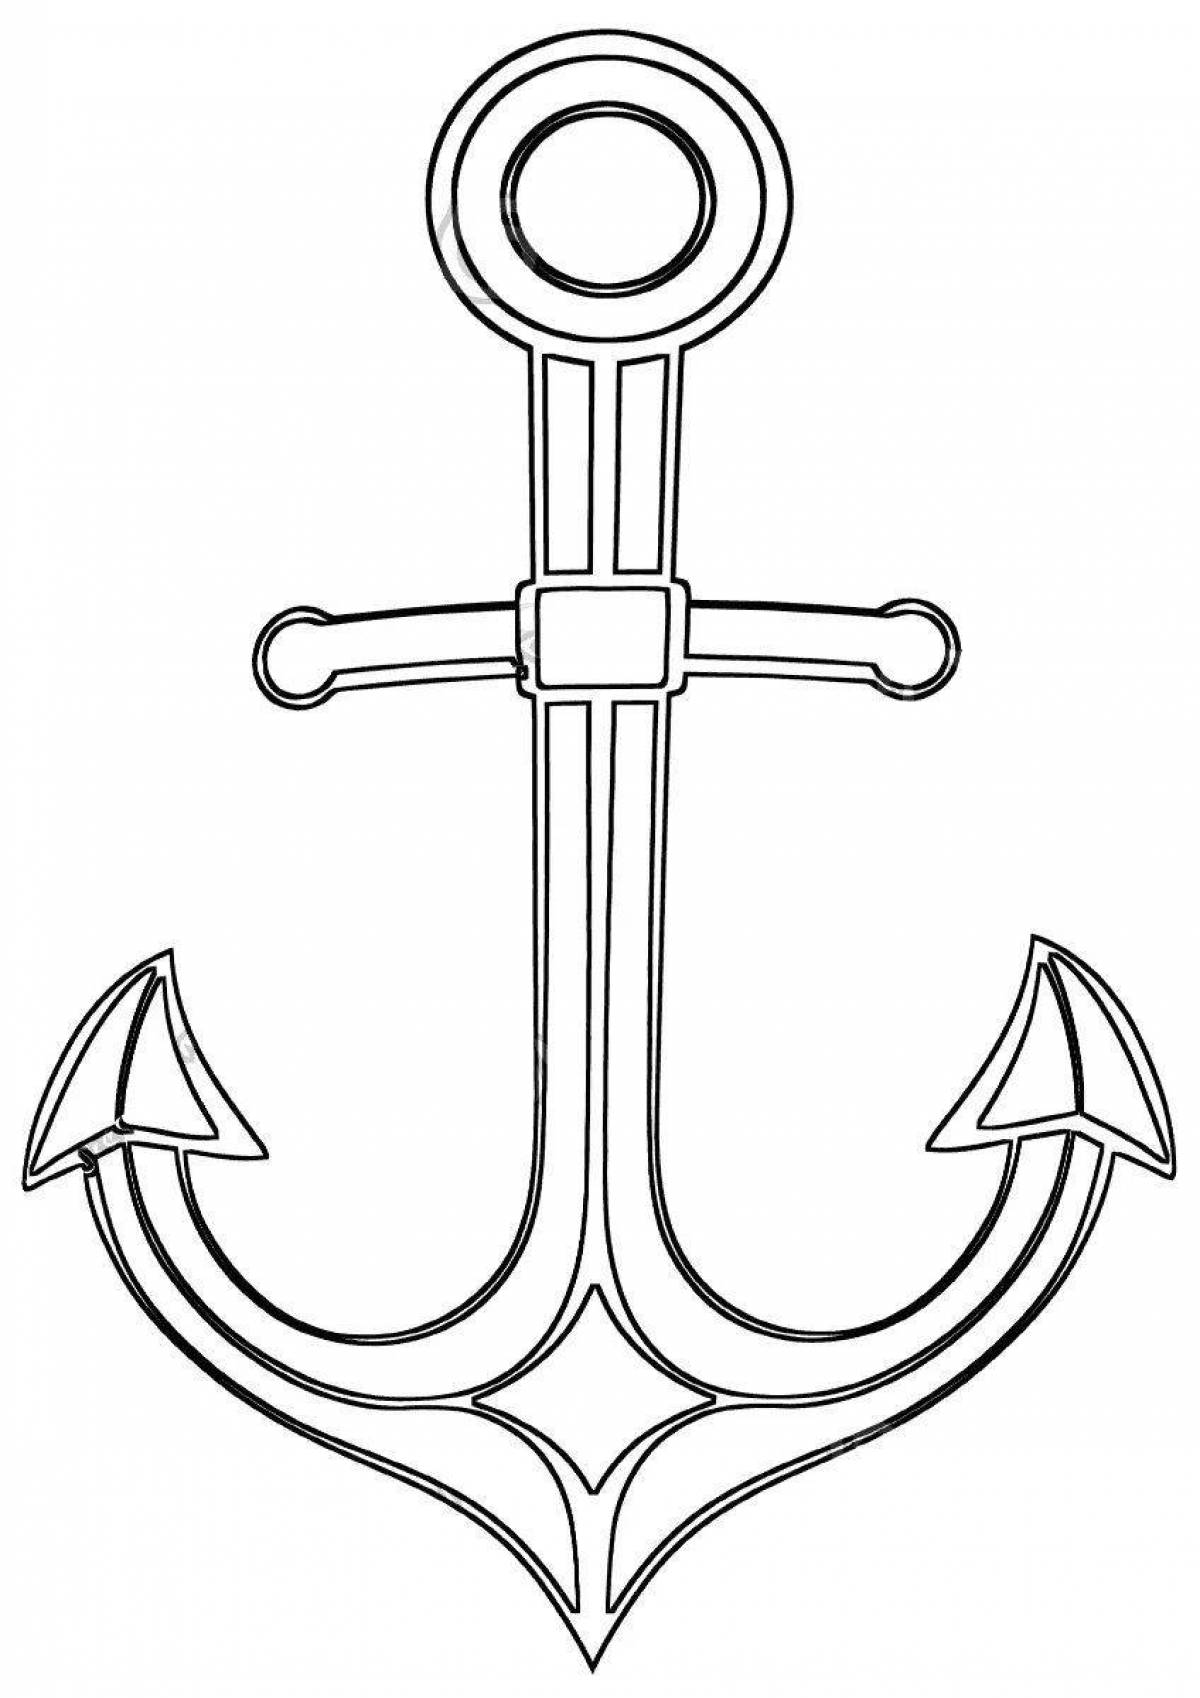 A fun coloring book for kids with anchors